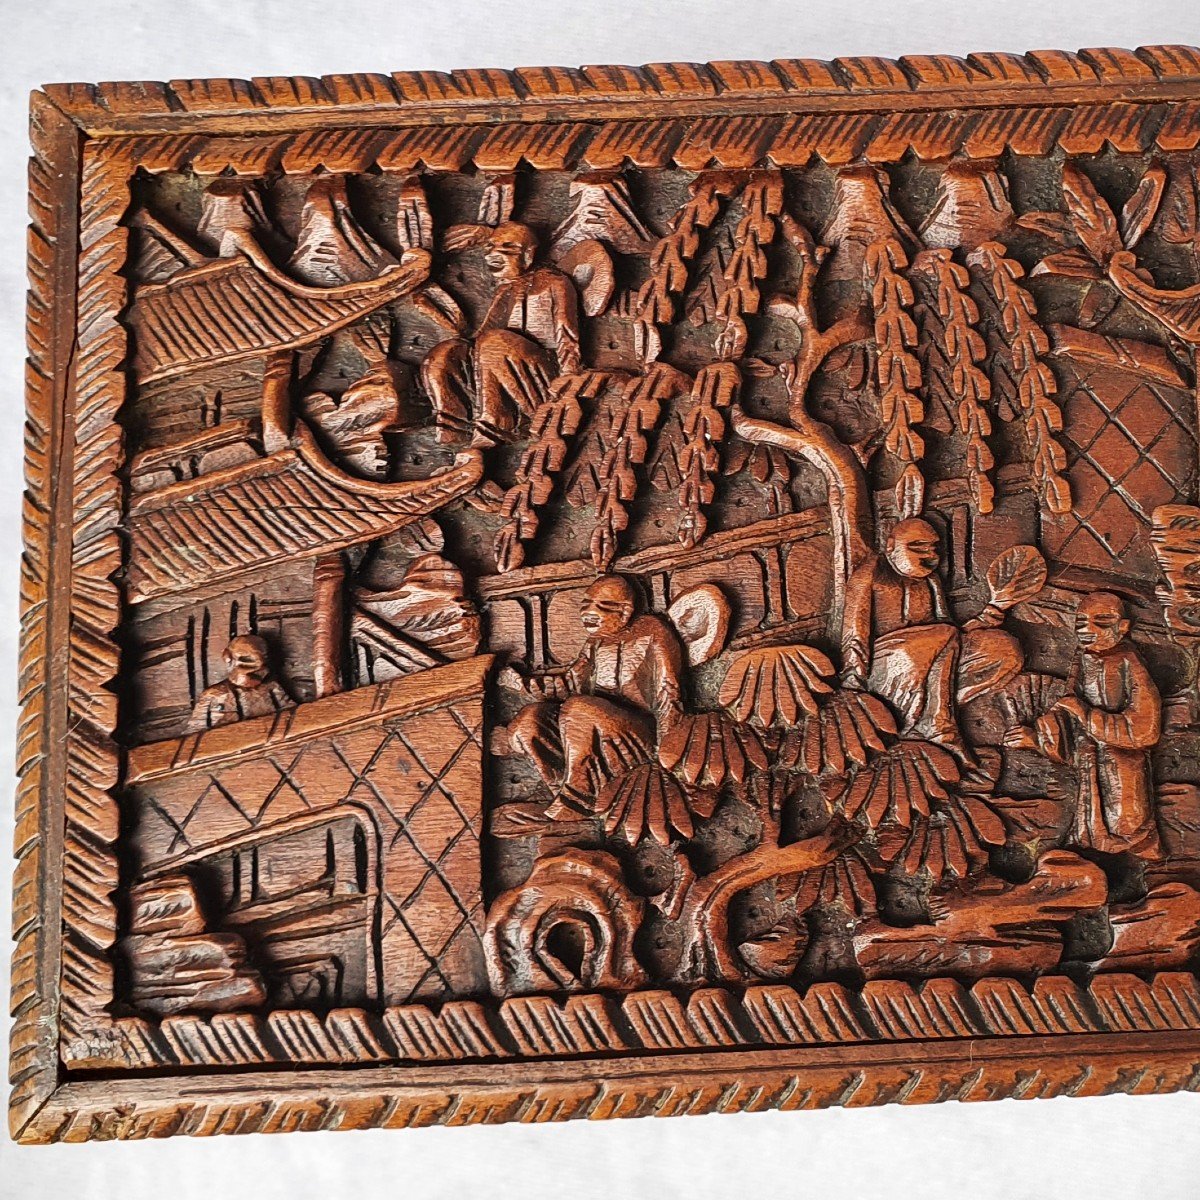 Wooden Box Carved With Pagodas And Characters, China, Canton, 19th Century-photo-3